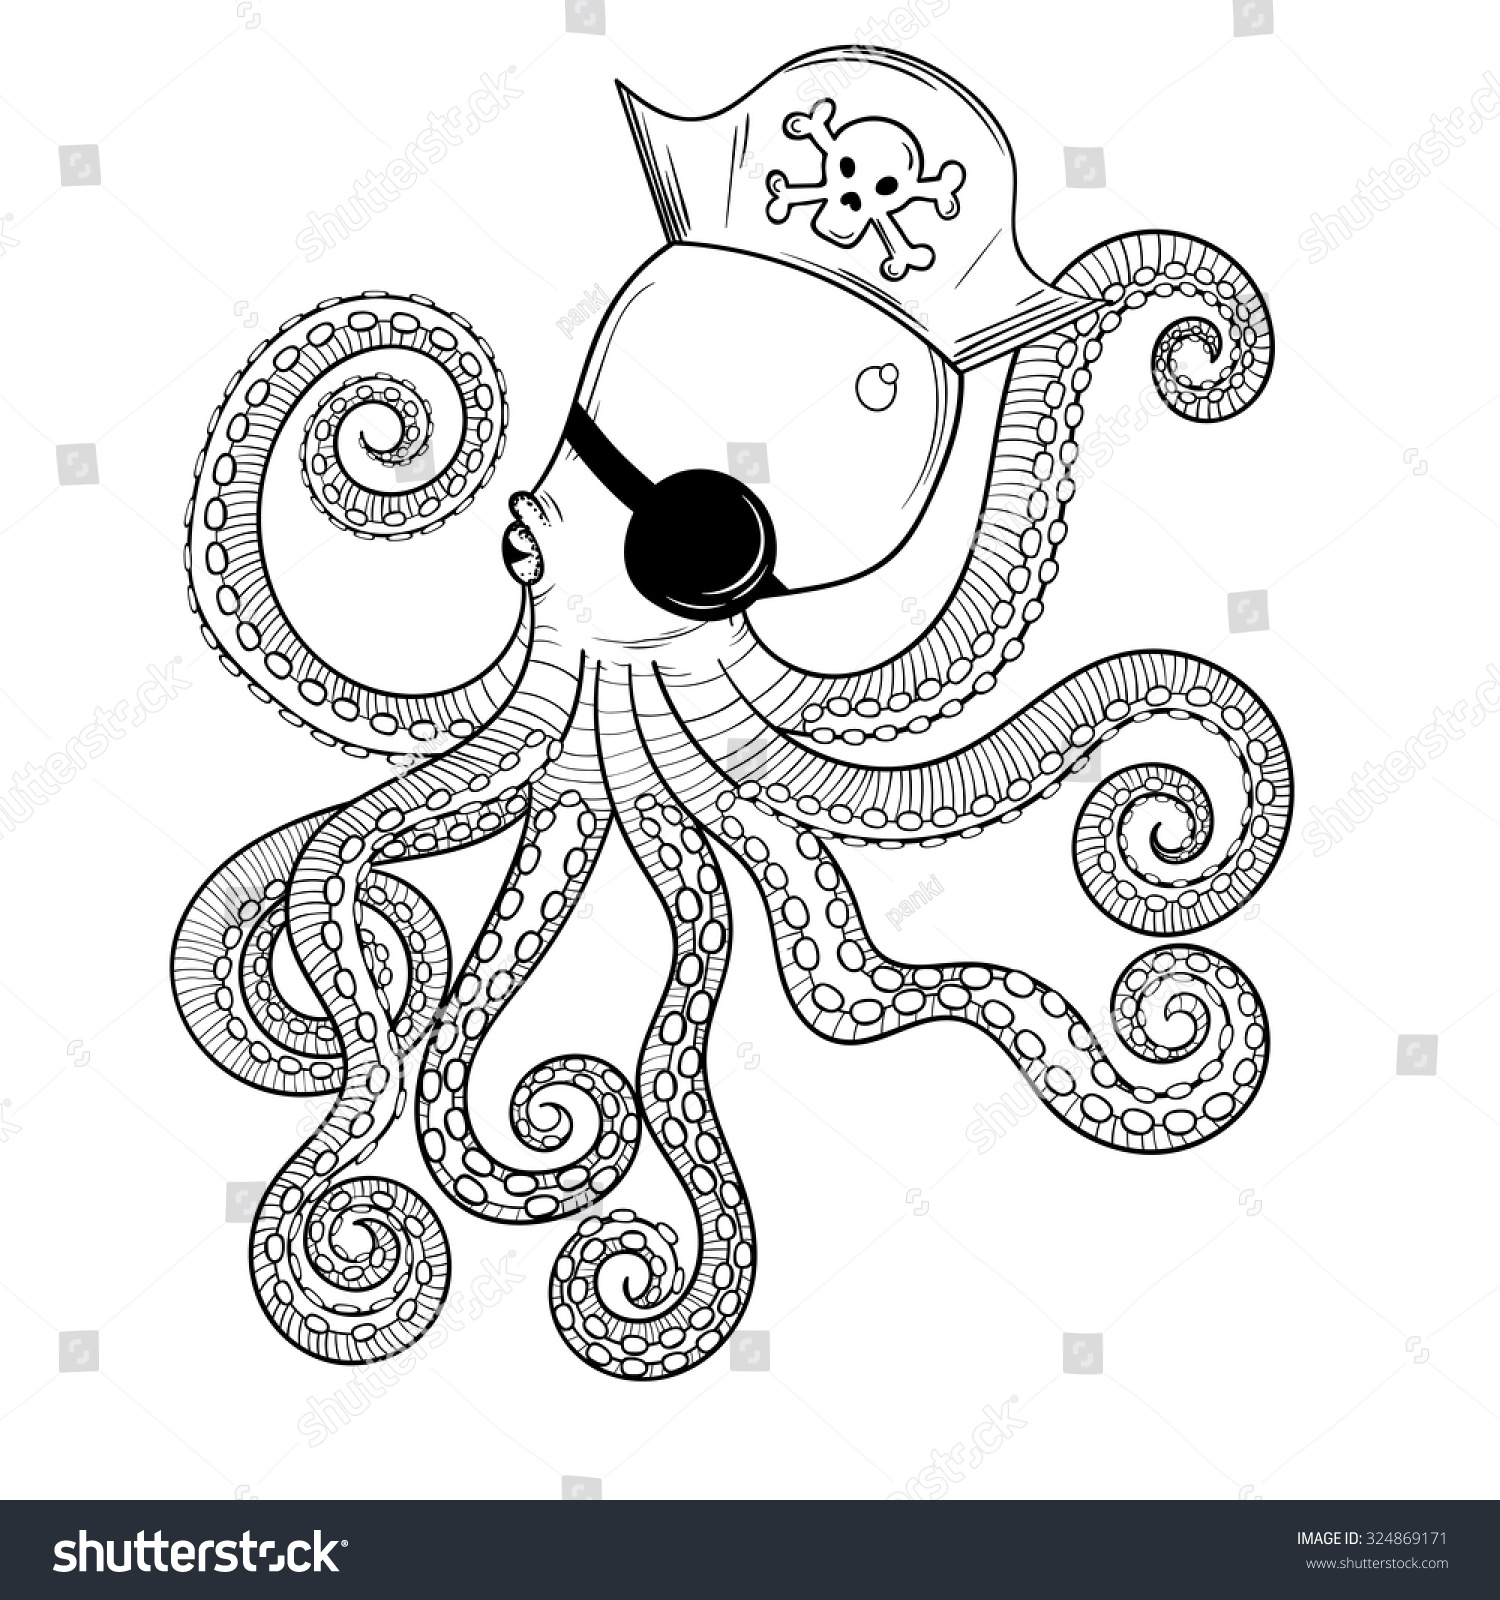 Hand drawn Octopus like Pirate animal totem for adult Coloring Page in zentangle style